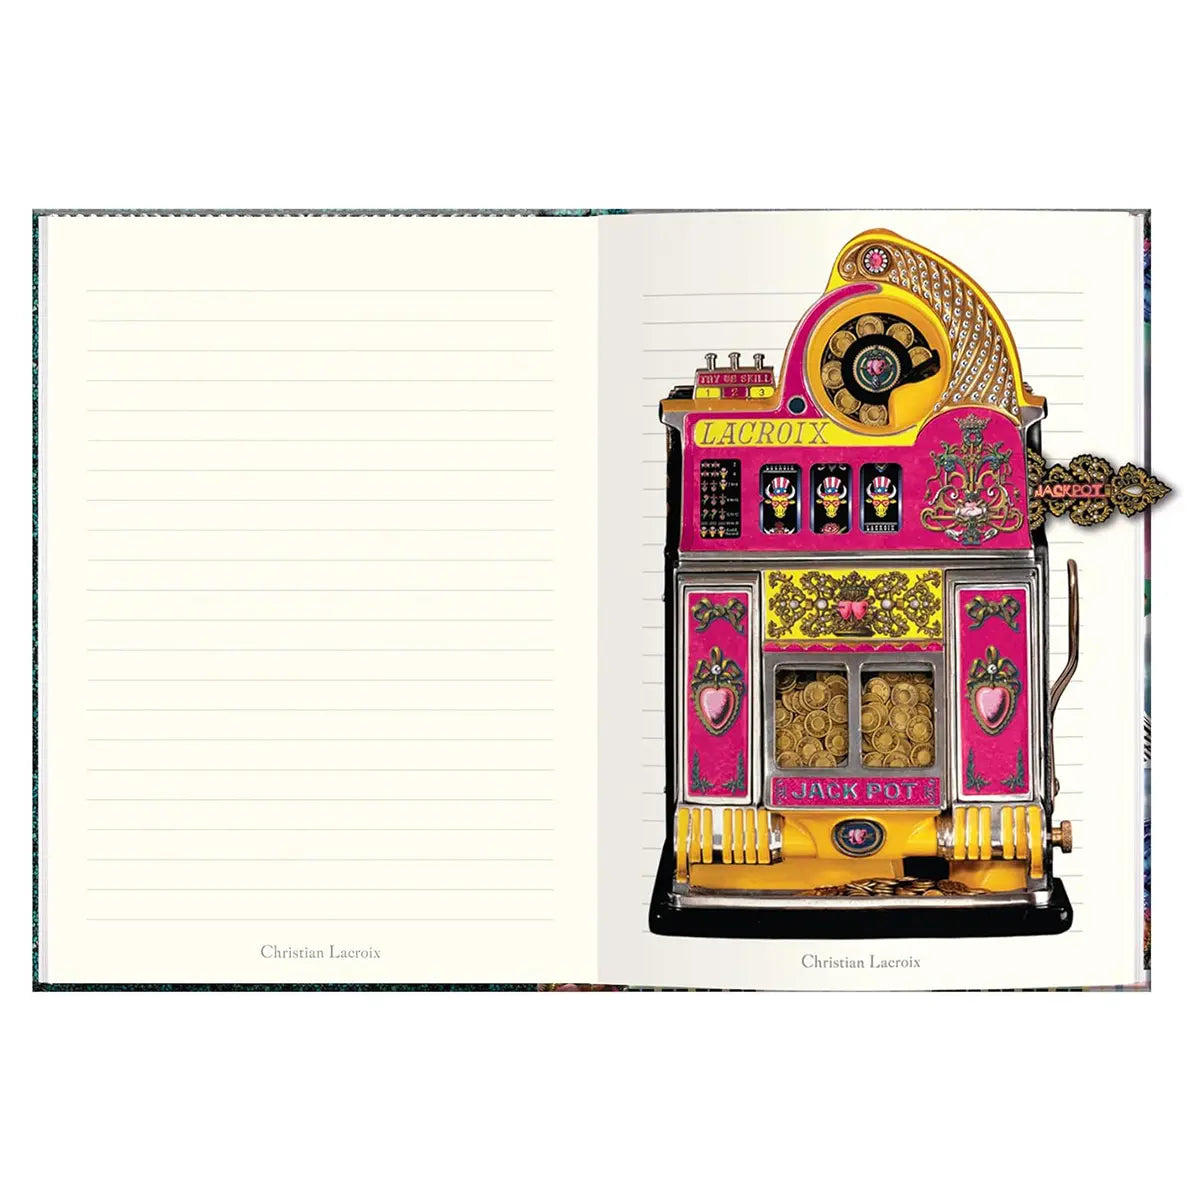 Inside of Hachette Christian Lacroix Fete vos Jeux Large Journal with ivory ruled pages and jackpot slot machine in pink and gold